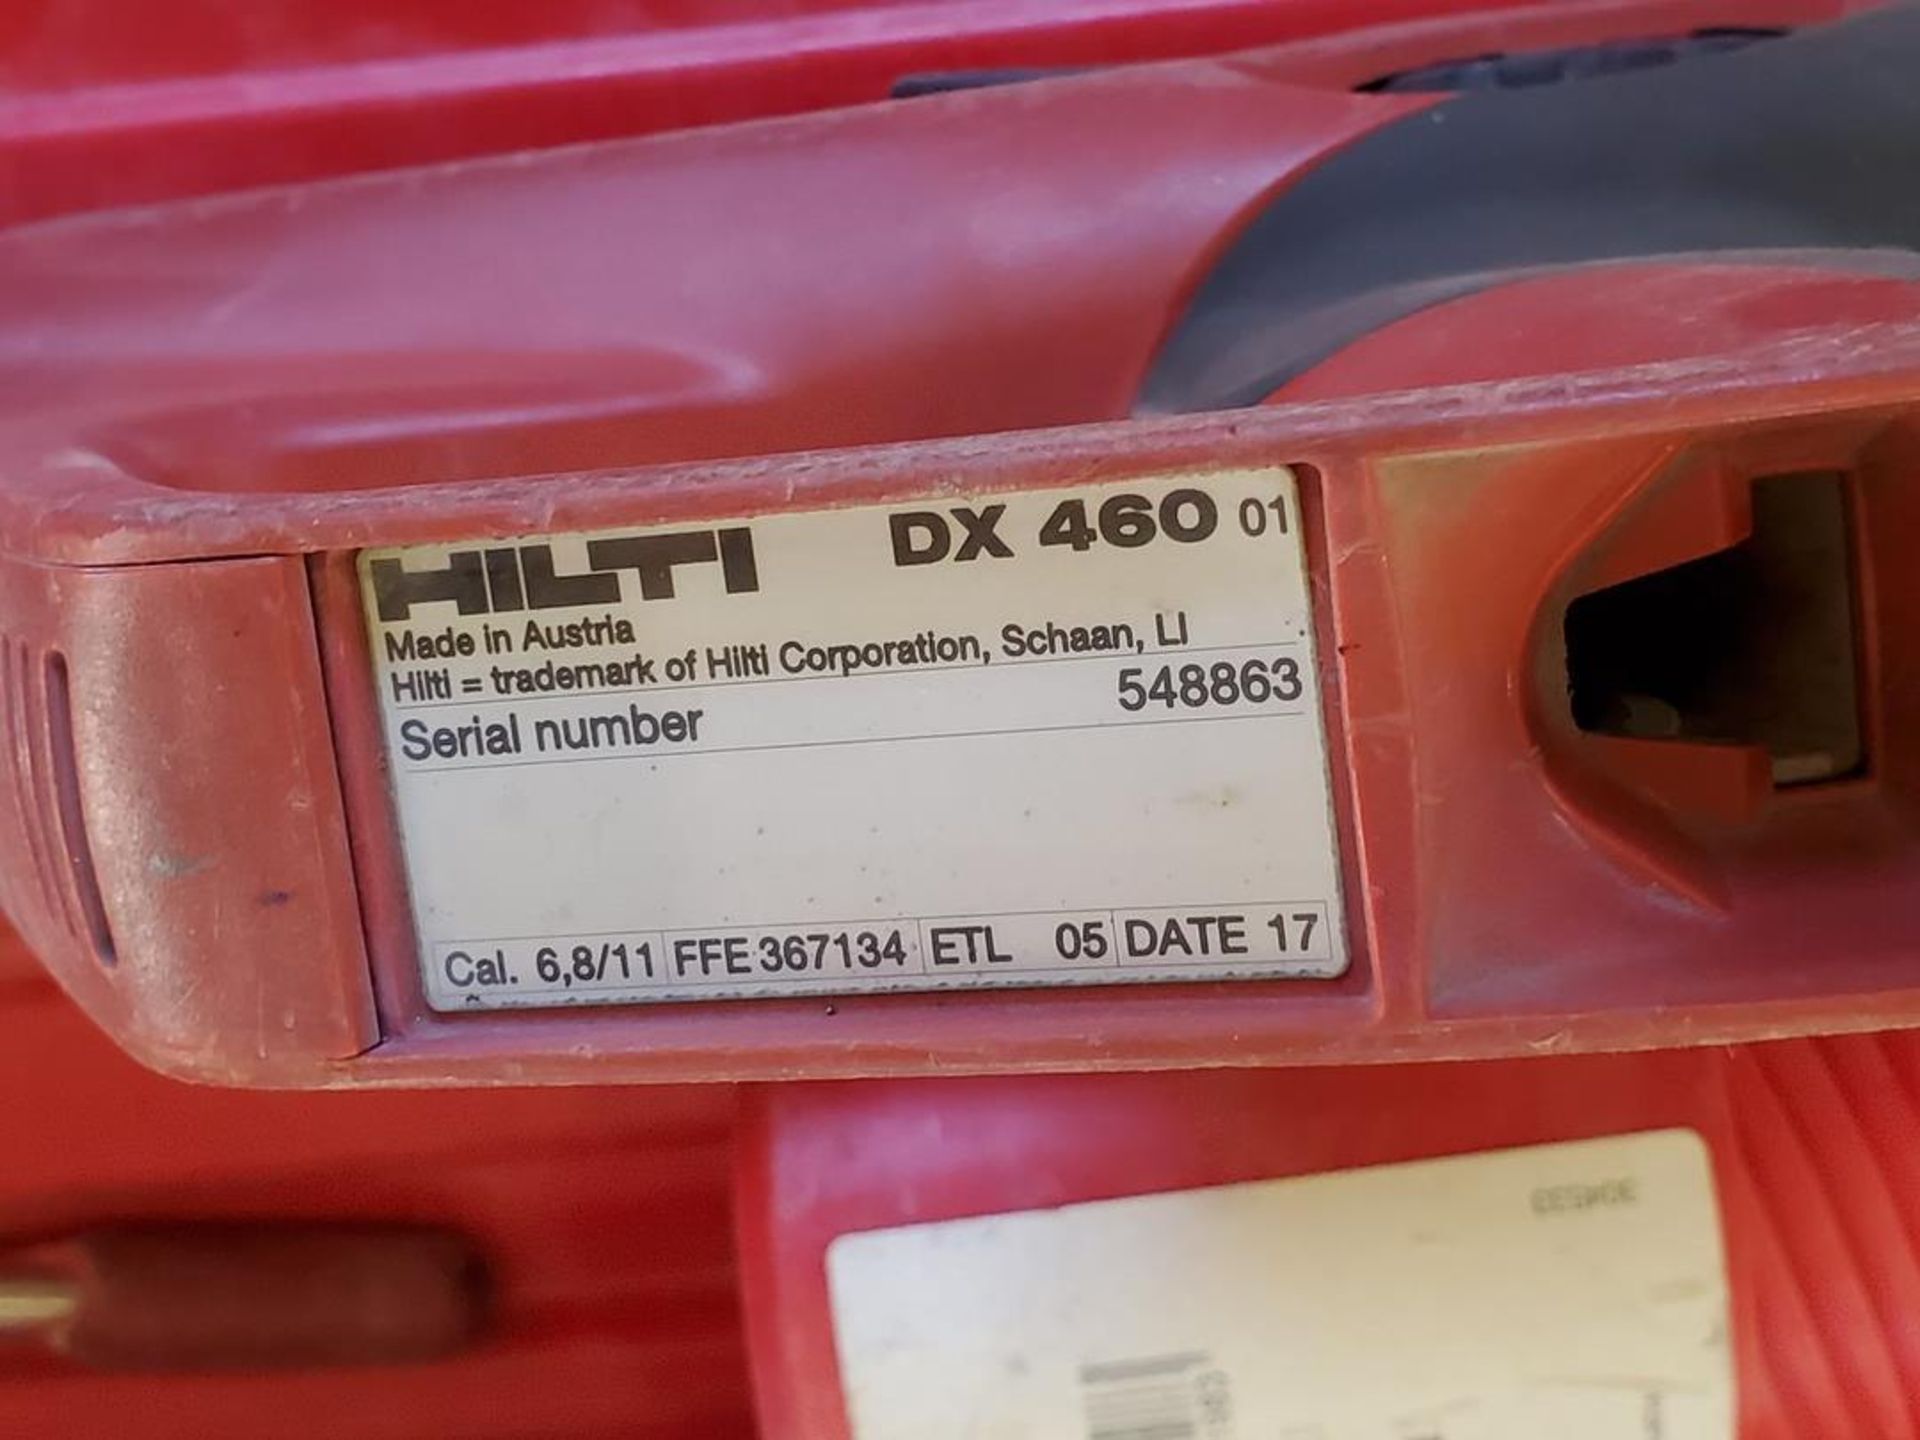 Hilti DX460 Powder-Actuated Fastening Tool - Image 5 of 5